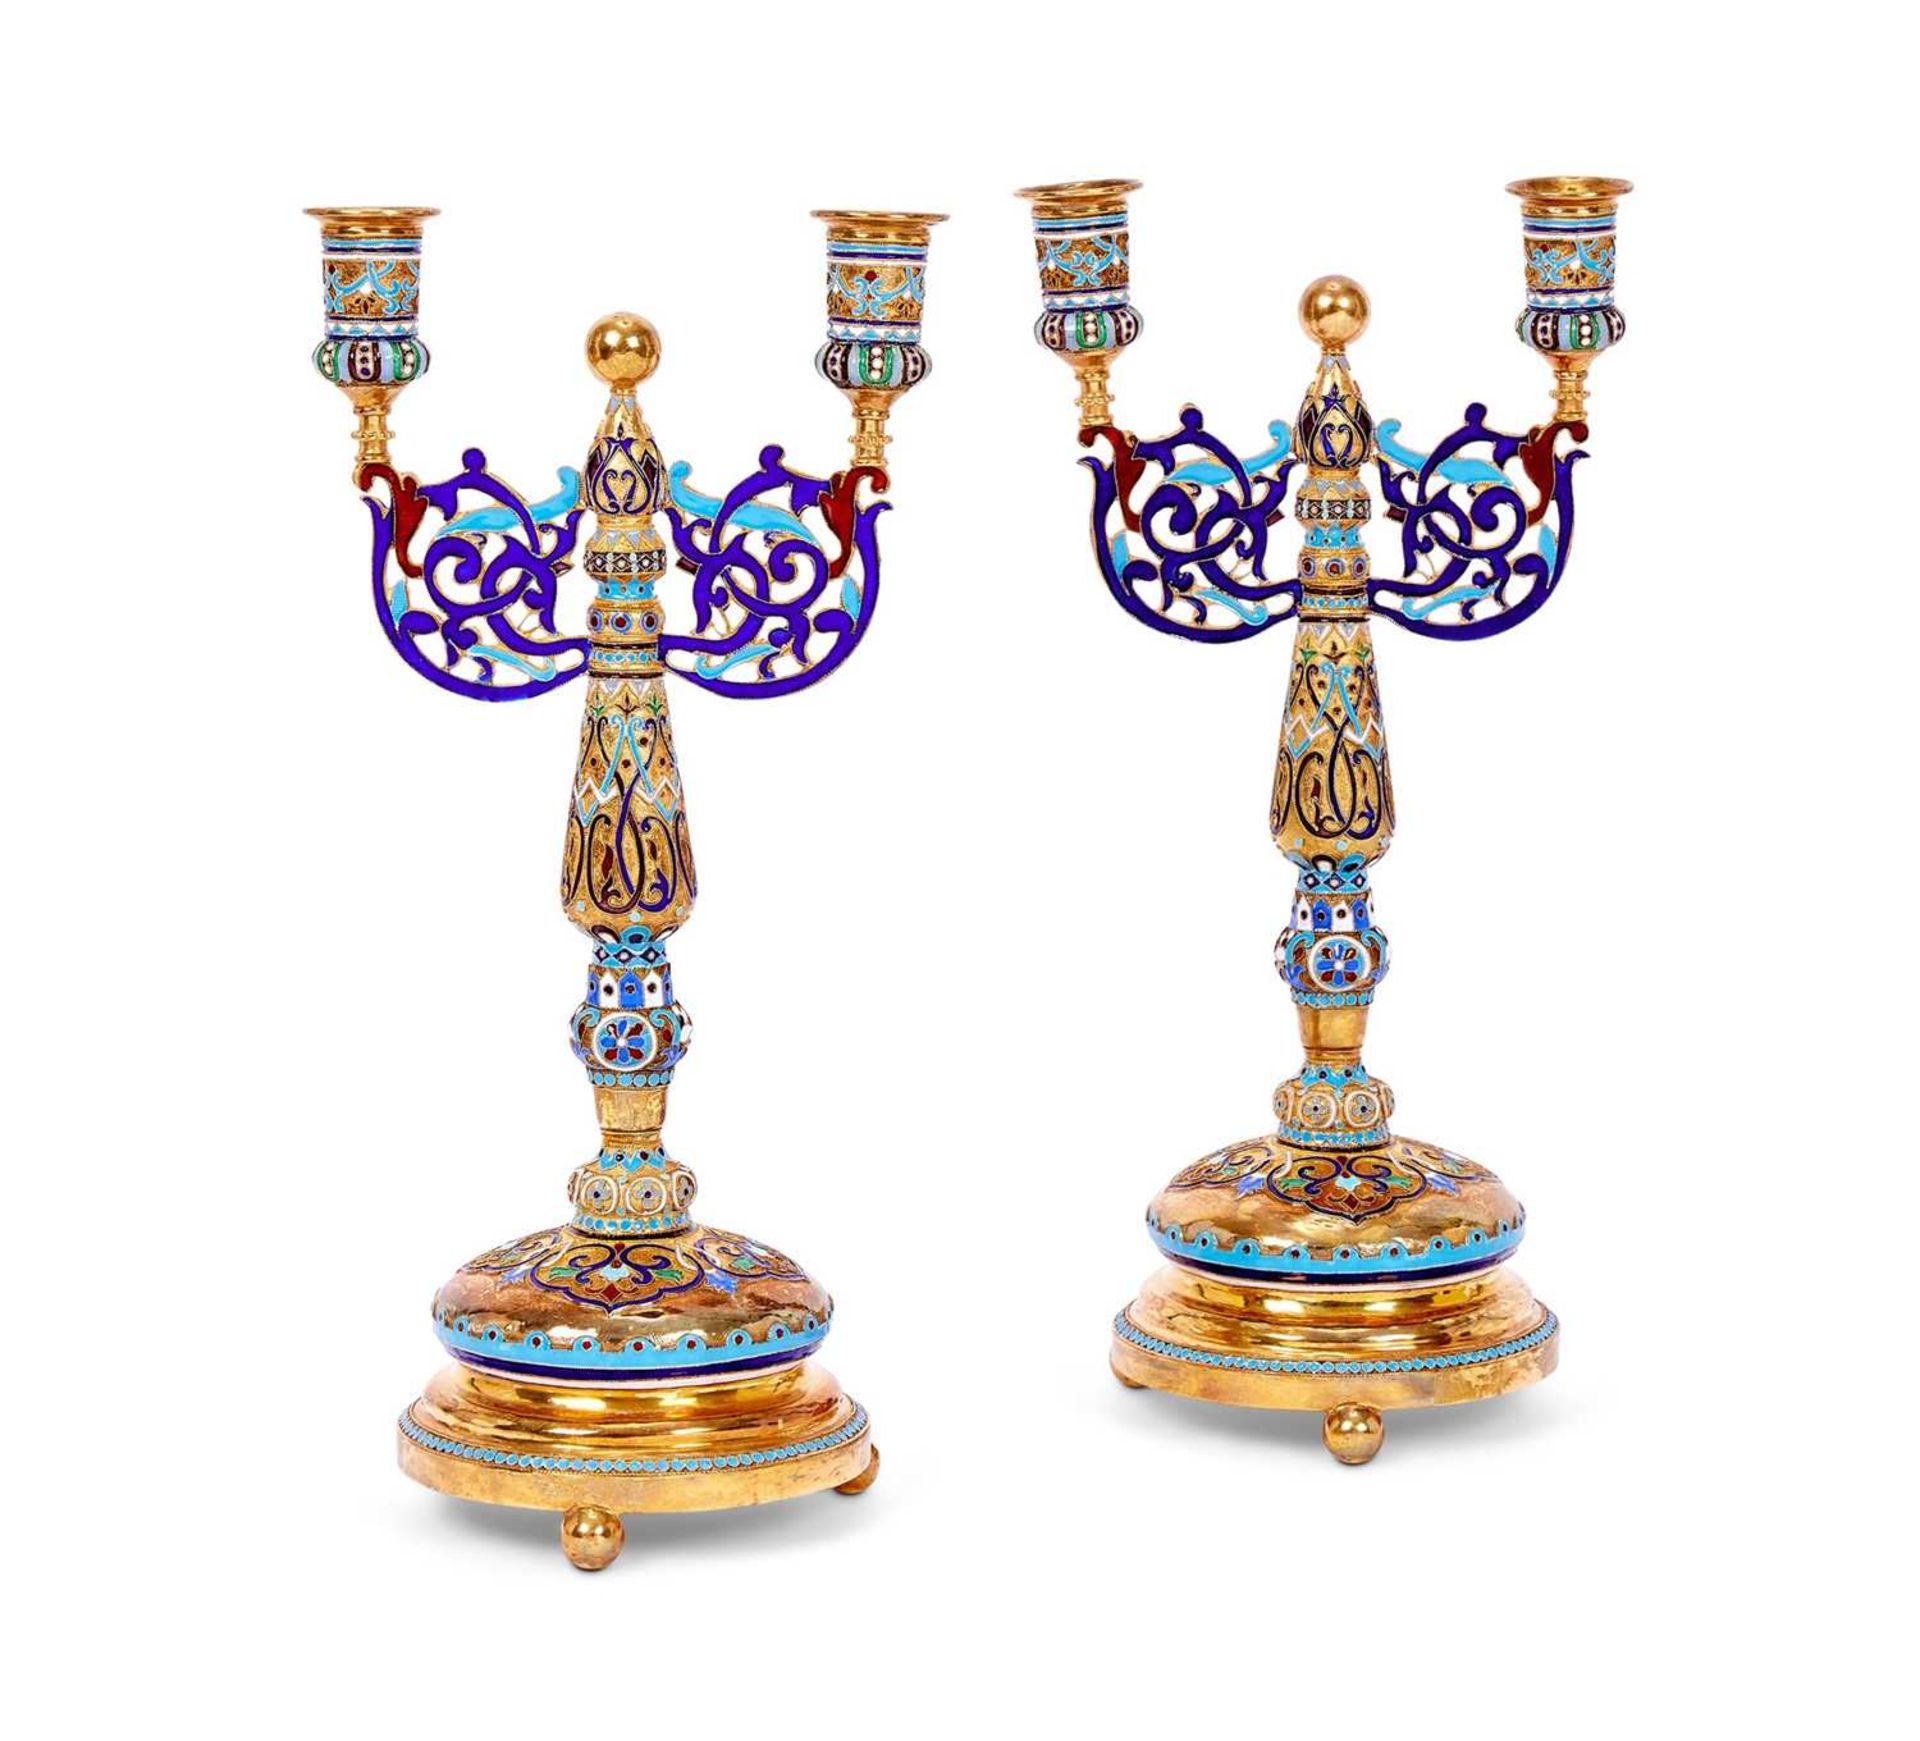 A PAIR OF SILVER GILT AND CHAMPLEVE ENAMEL CANDELABRA IN THE RUSSIAN STYLE - Image 2 of 4